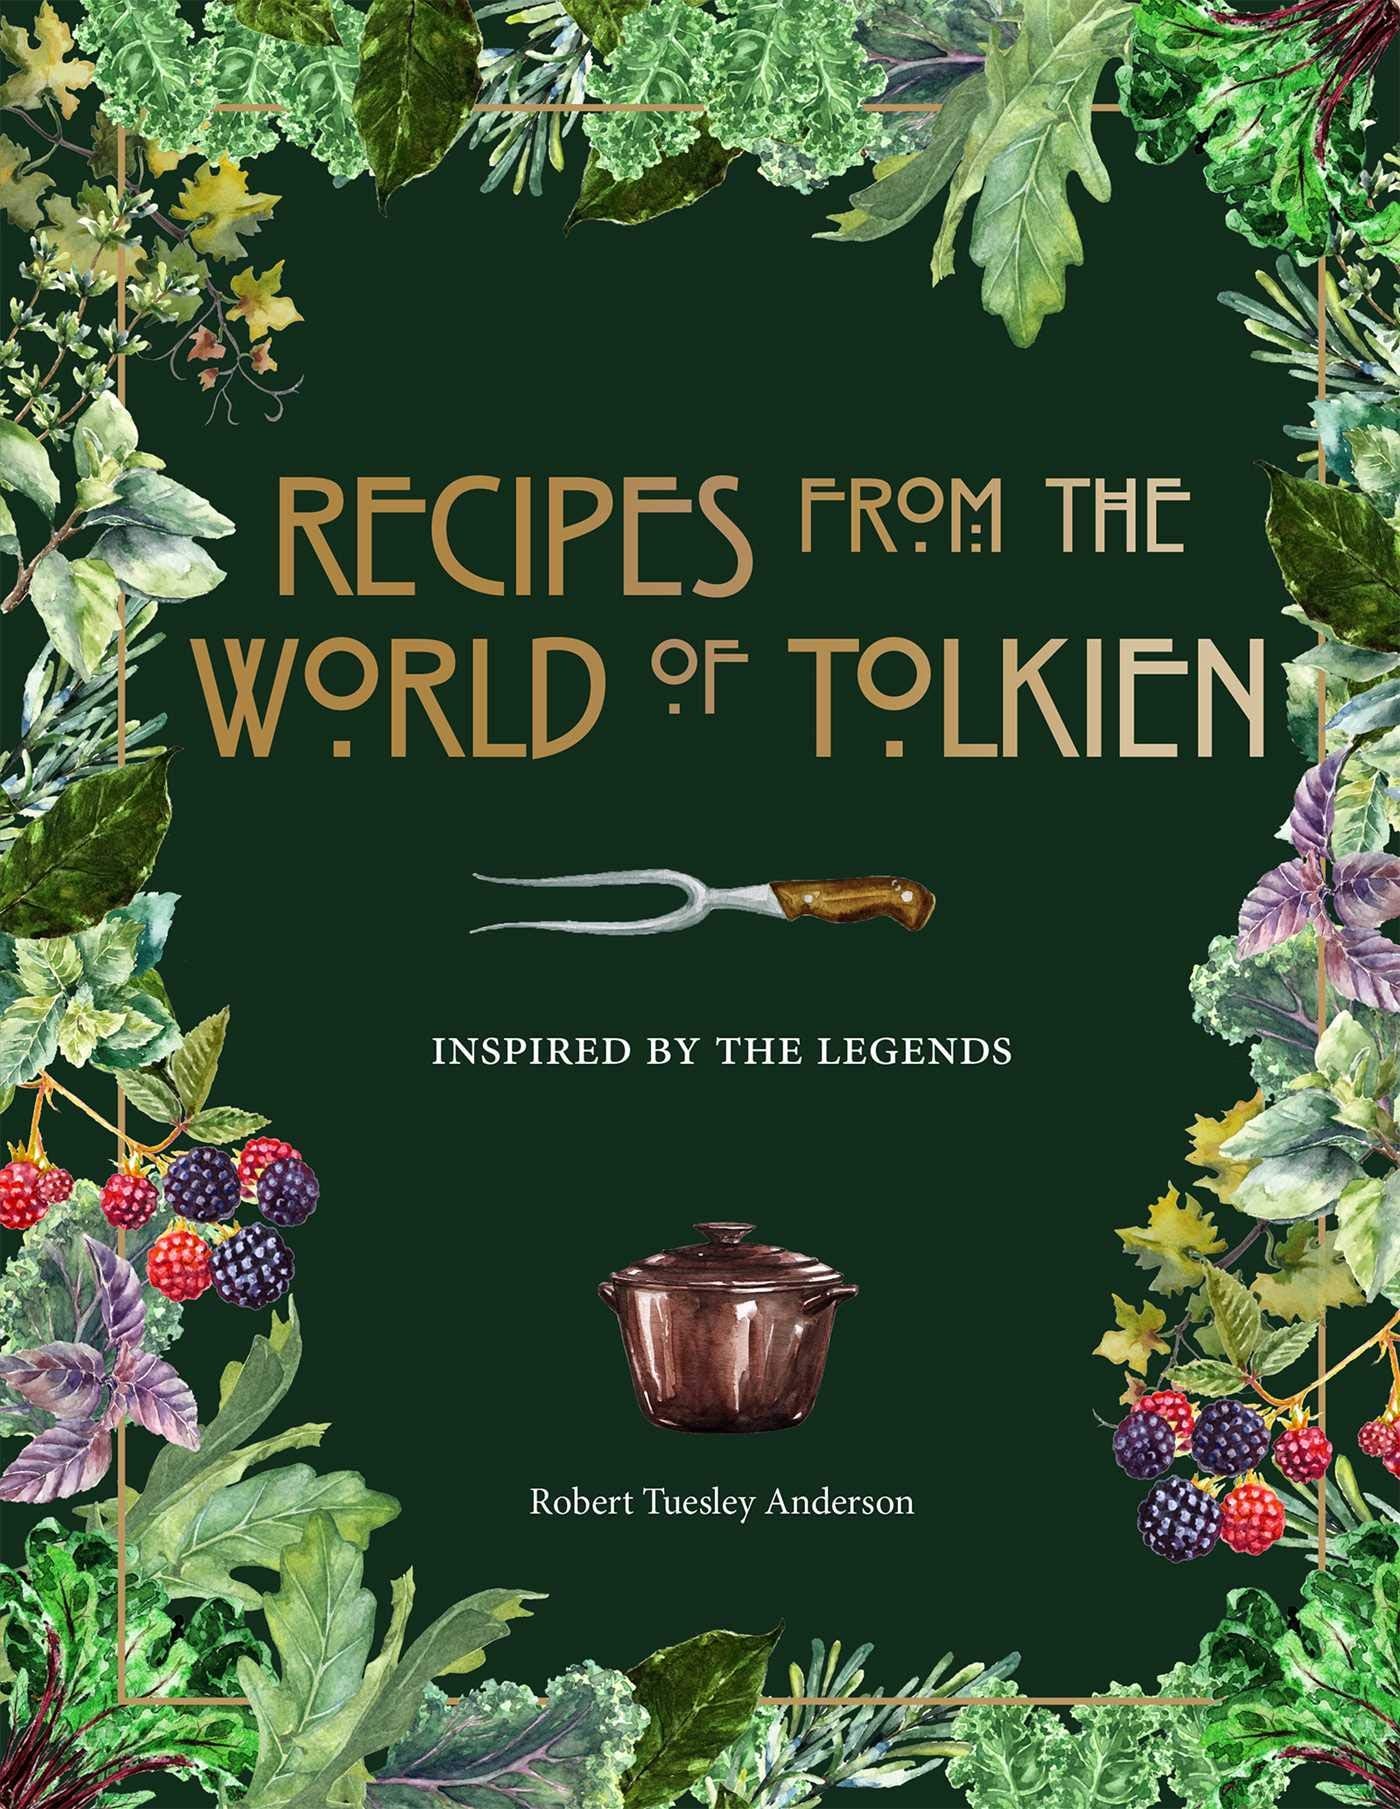 Recipes from the World of Tolkien: Inspired by the Legends by Anderson, Robert Tuesley